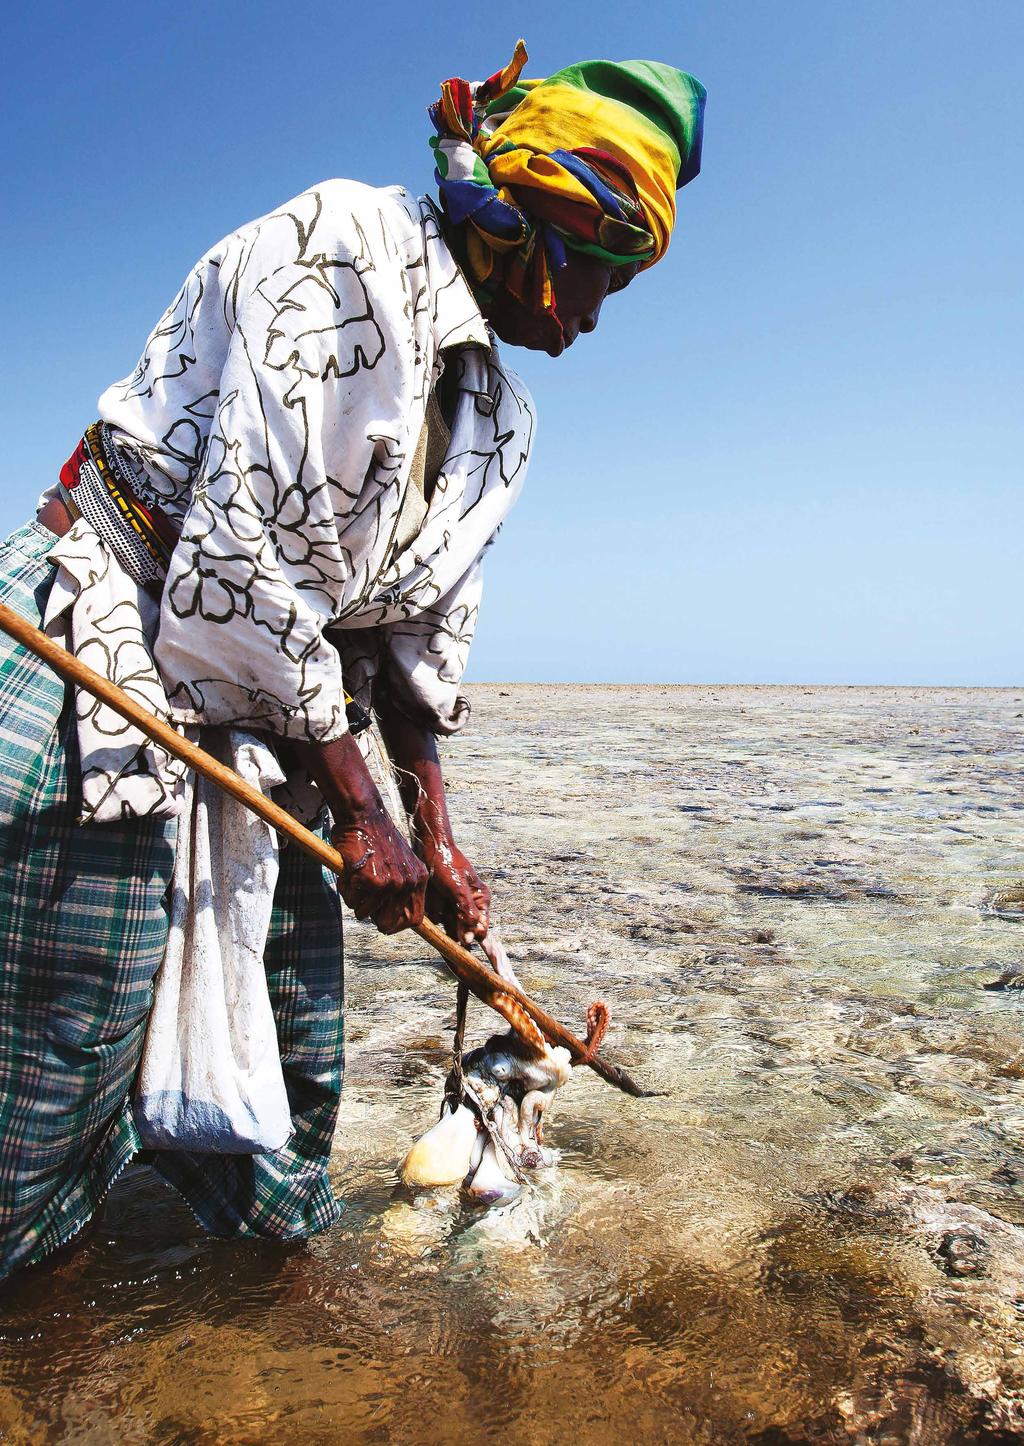 Empowering women Octopus fishing is particularly important for women in Madagascar, who are able to glean on reef flats by foot using simple spears, yet rarely have the opportunity to participate in